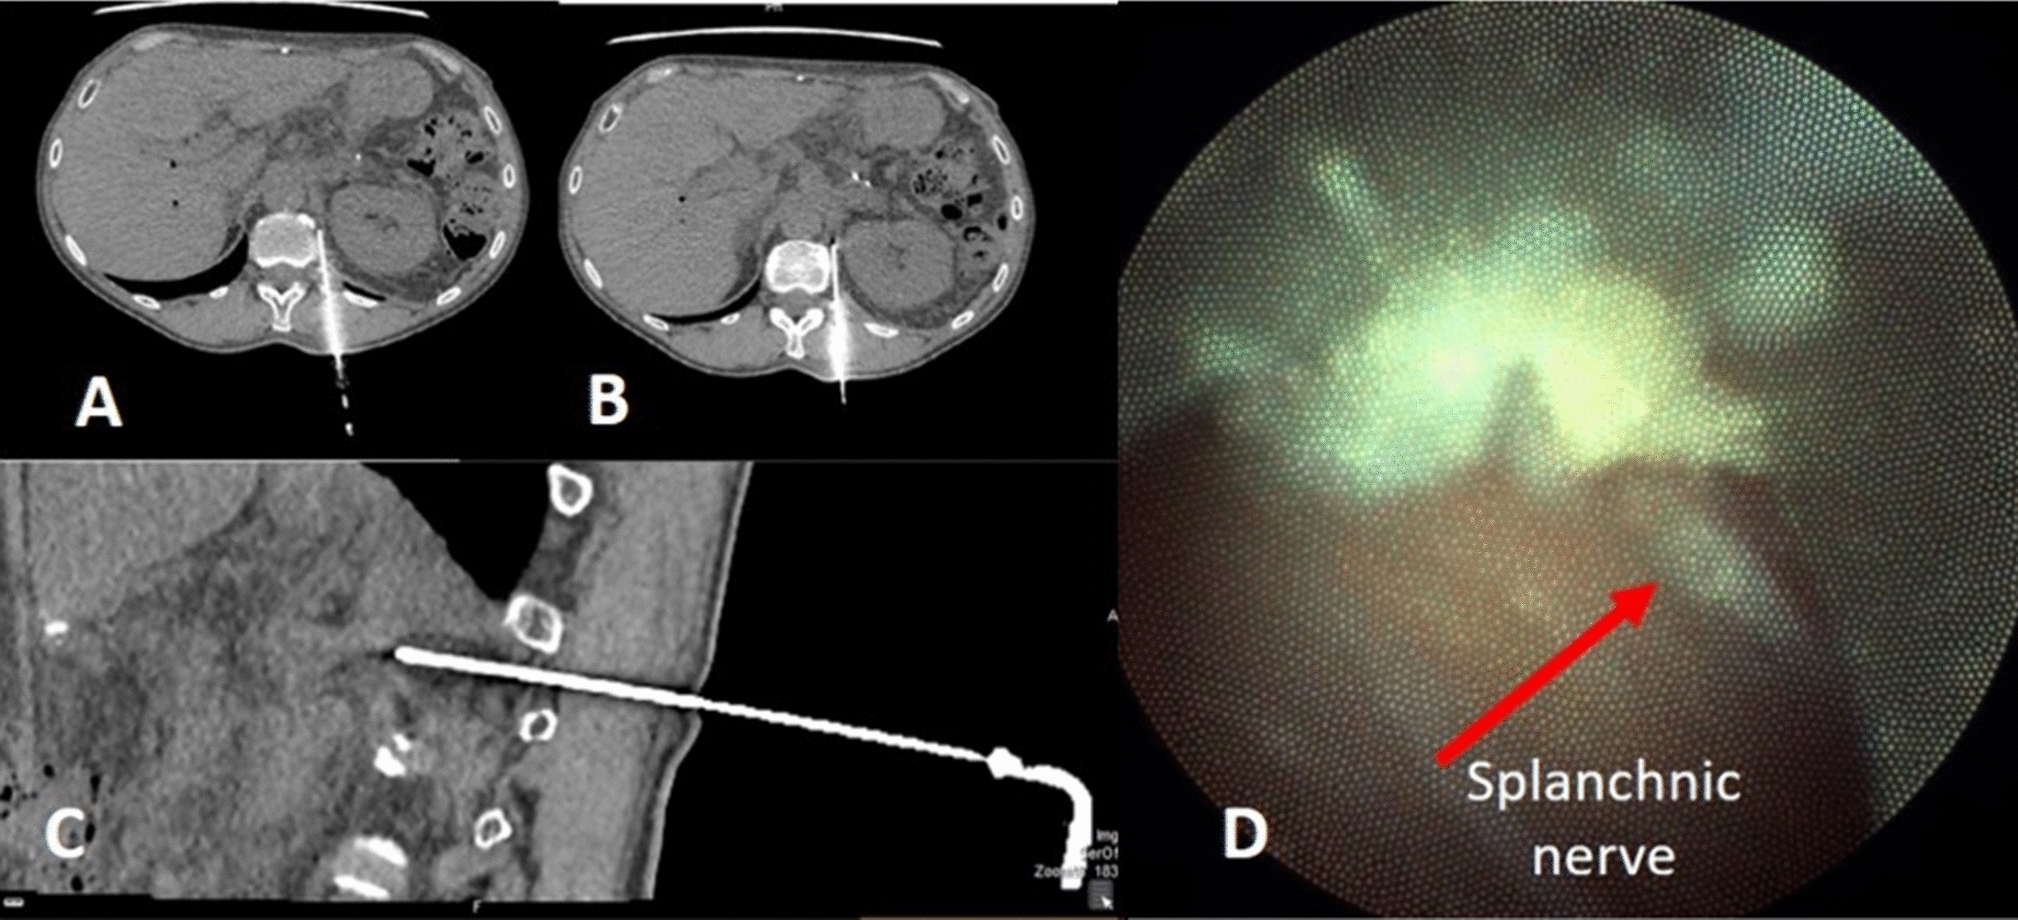 Percutaneous Cryoneurolysis of Splanchnic Nerves Under Combined Computed Tomography and Endoscopy Guidance: Pushing the Boundaries of Hybrid Imaging